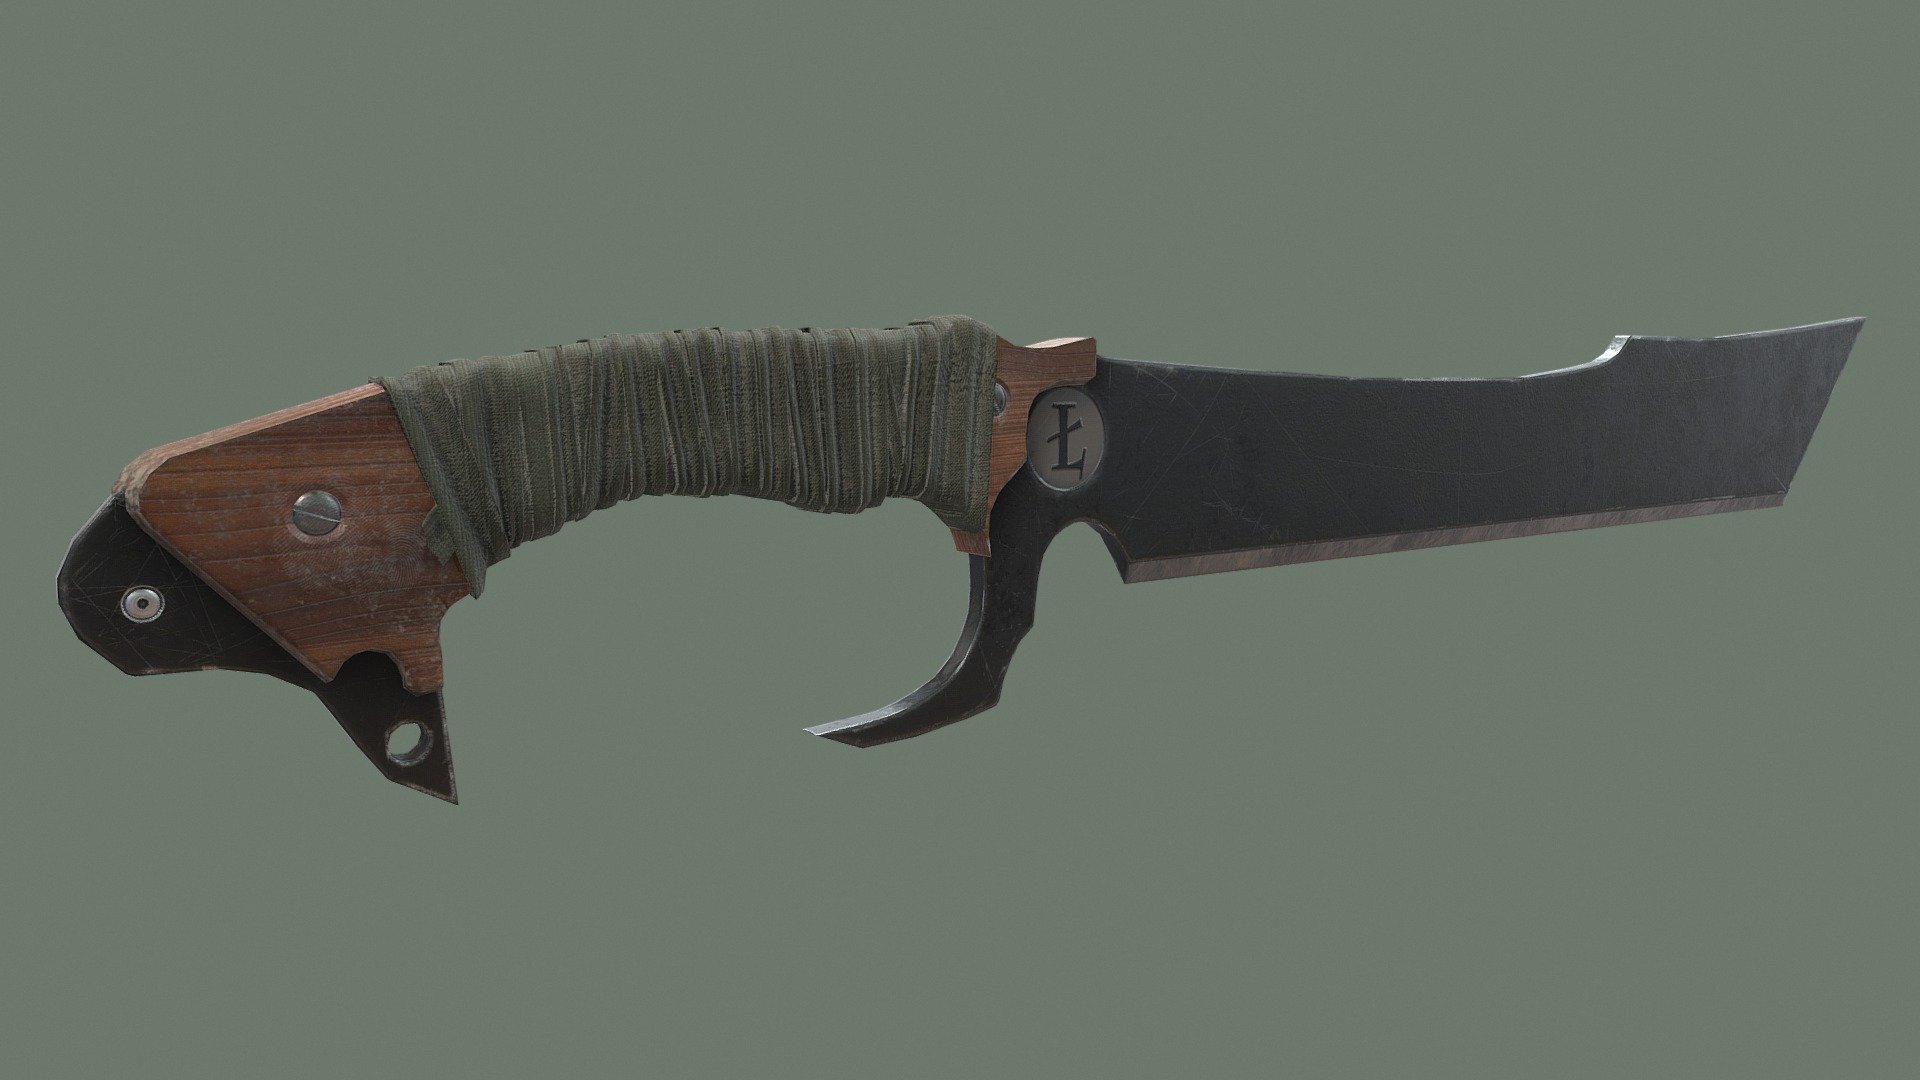 Here's a machete model which I had created. I had the idea of this African man who only hunts lions to live off of their meat and is infamous for doing so in indigenous African tribes so I wanted to create the tool he would use to fearlessly slaughter his prey 3d model